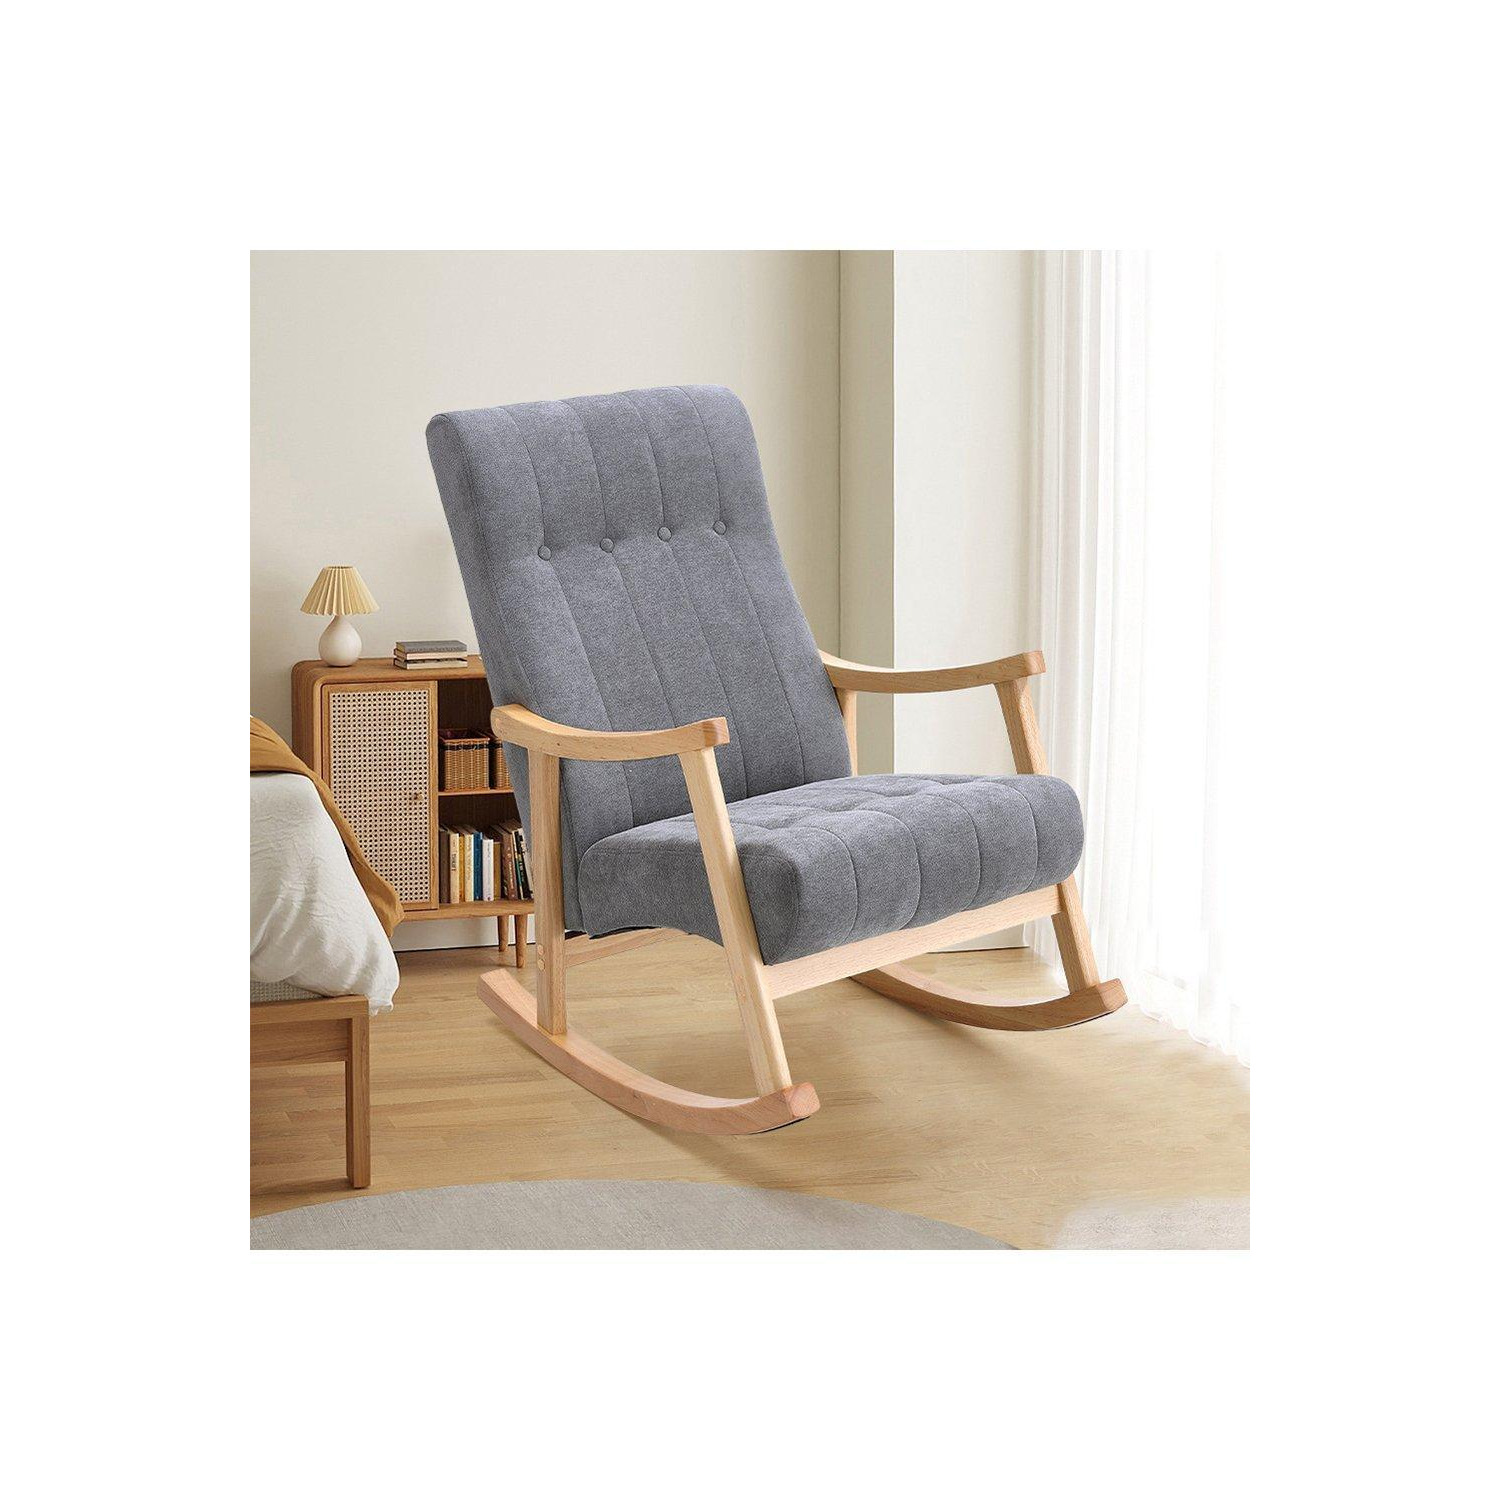 Modern Style Upholstered Tufting Rocking Chair - image 1